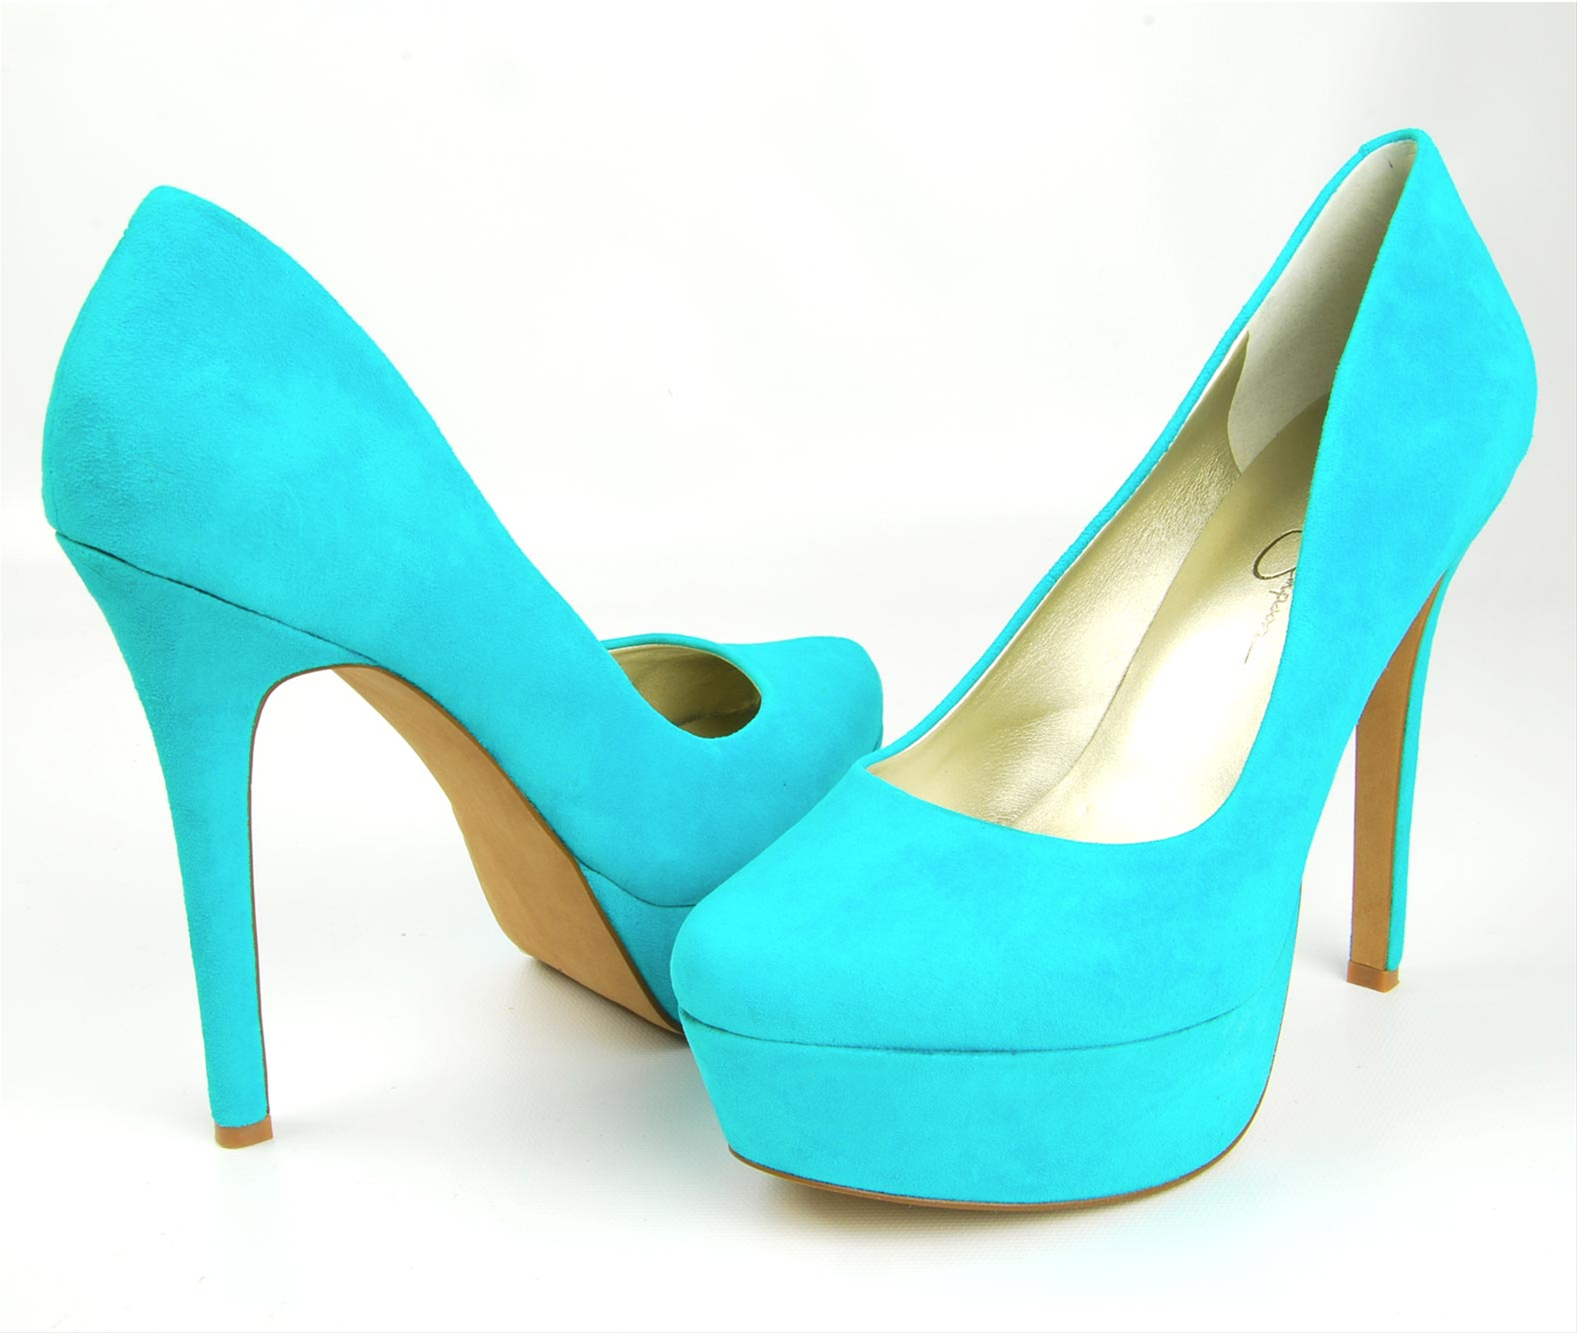 Confessions of a Shoeaholic: My Bright Colored Shoes